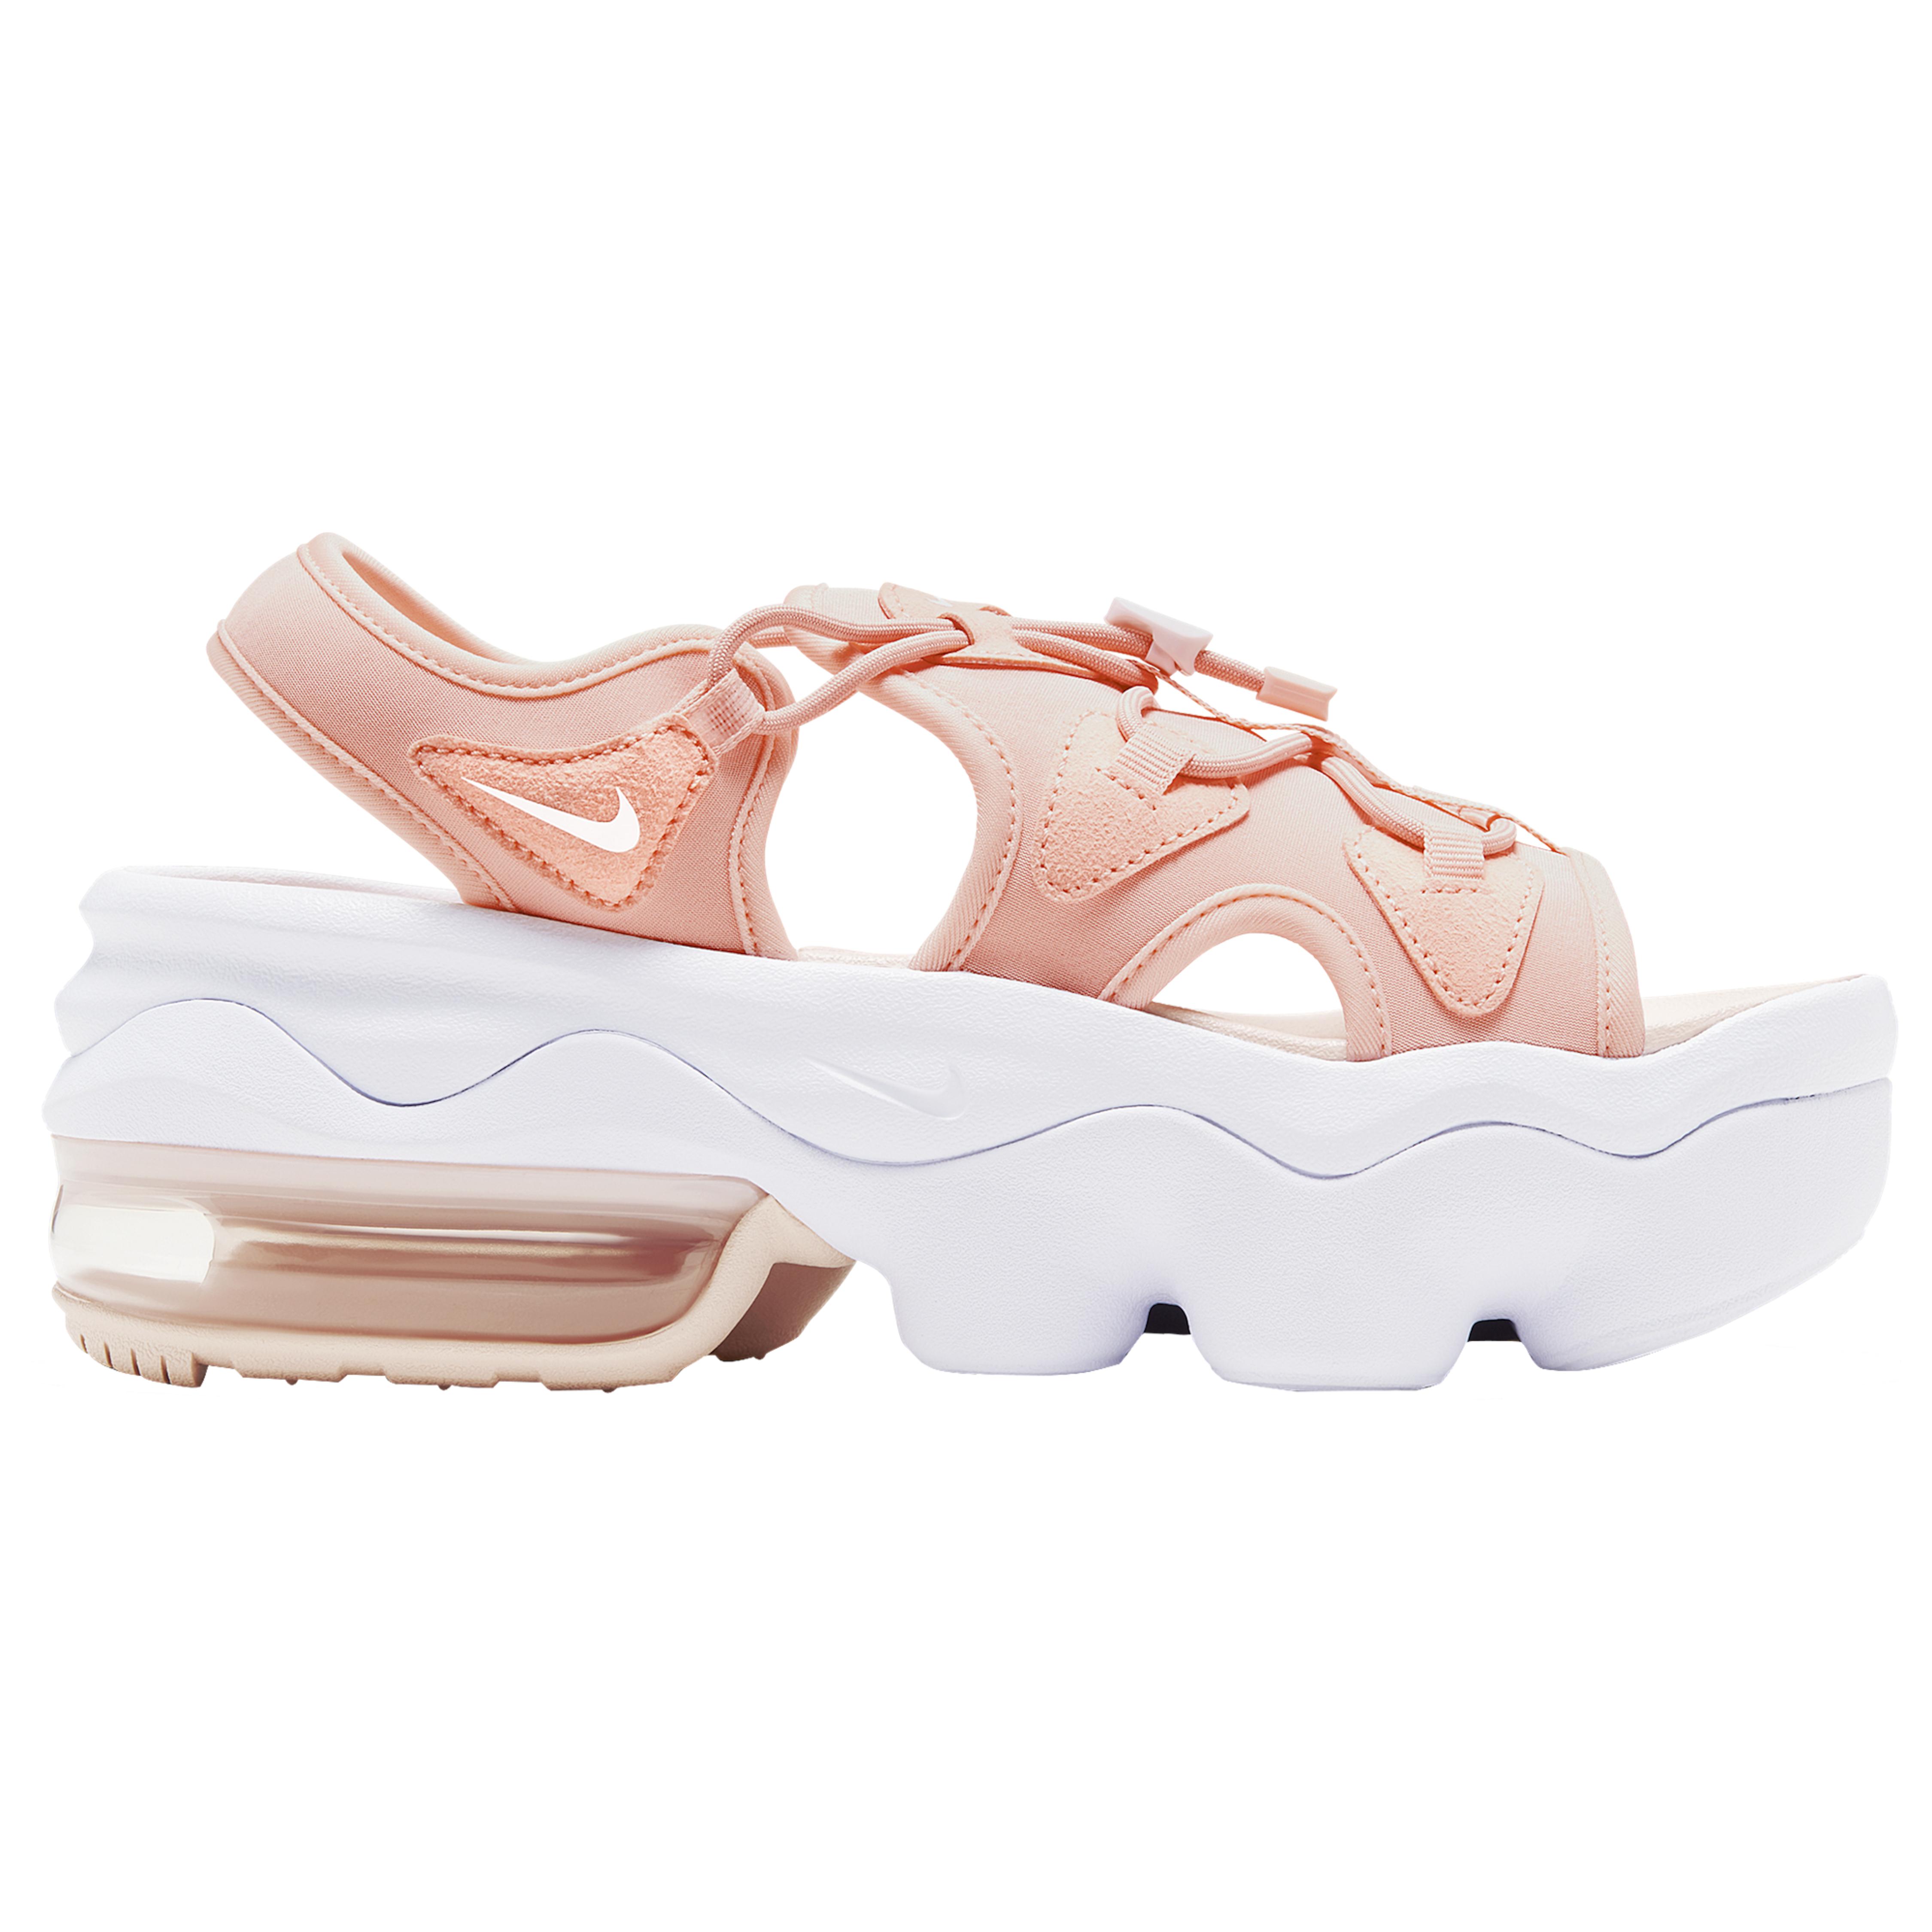 Nike Air Max Koko Sandal - Shoes in Washed Coral/White/Guava Ice (Pink